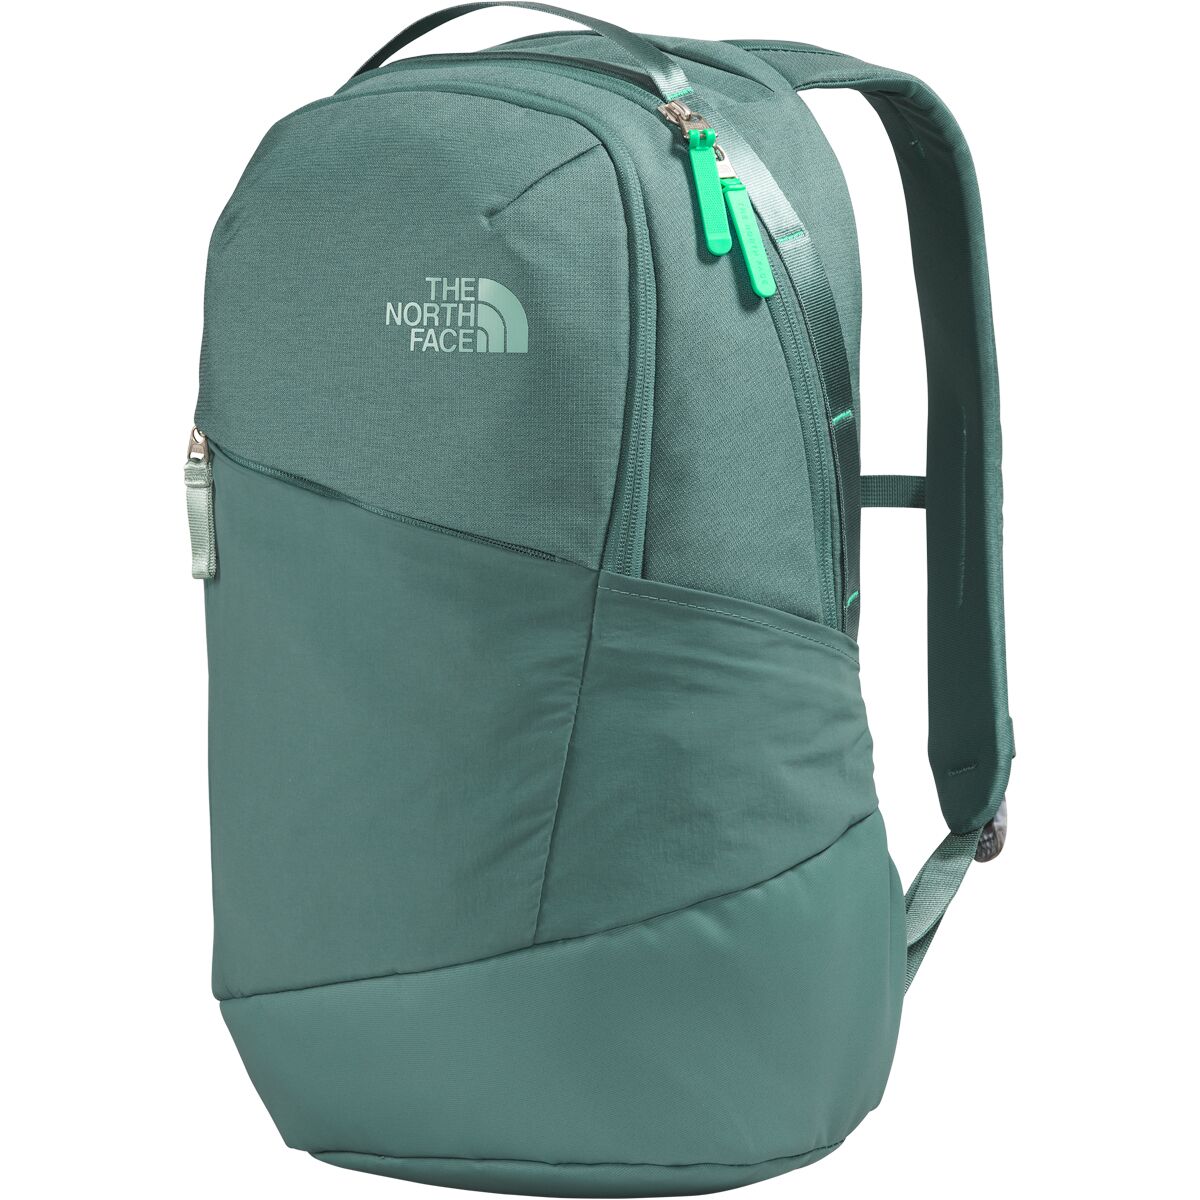 The North Face Isabella 3.0 20L Daypack - Women's